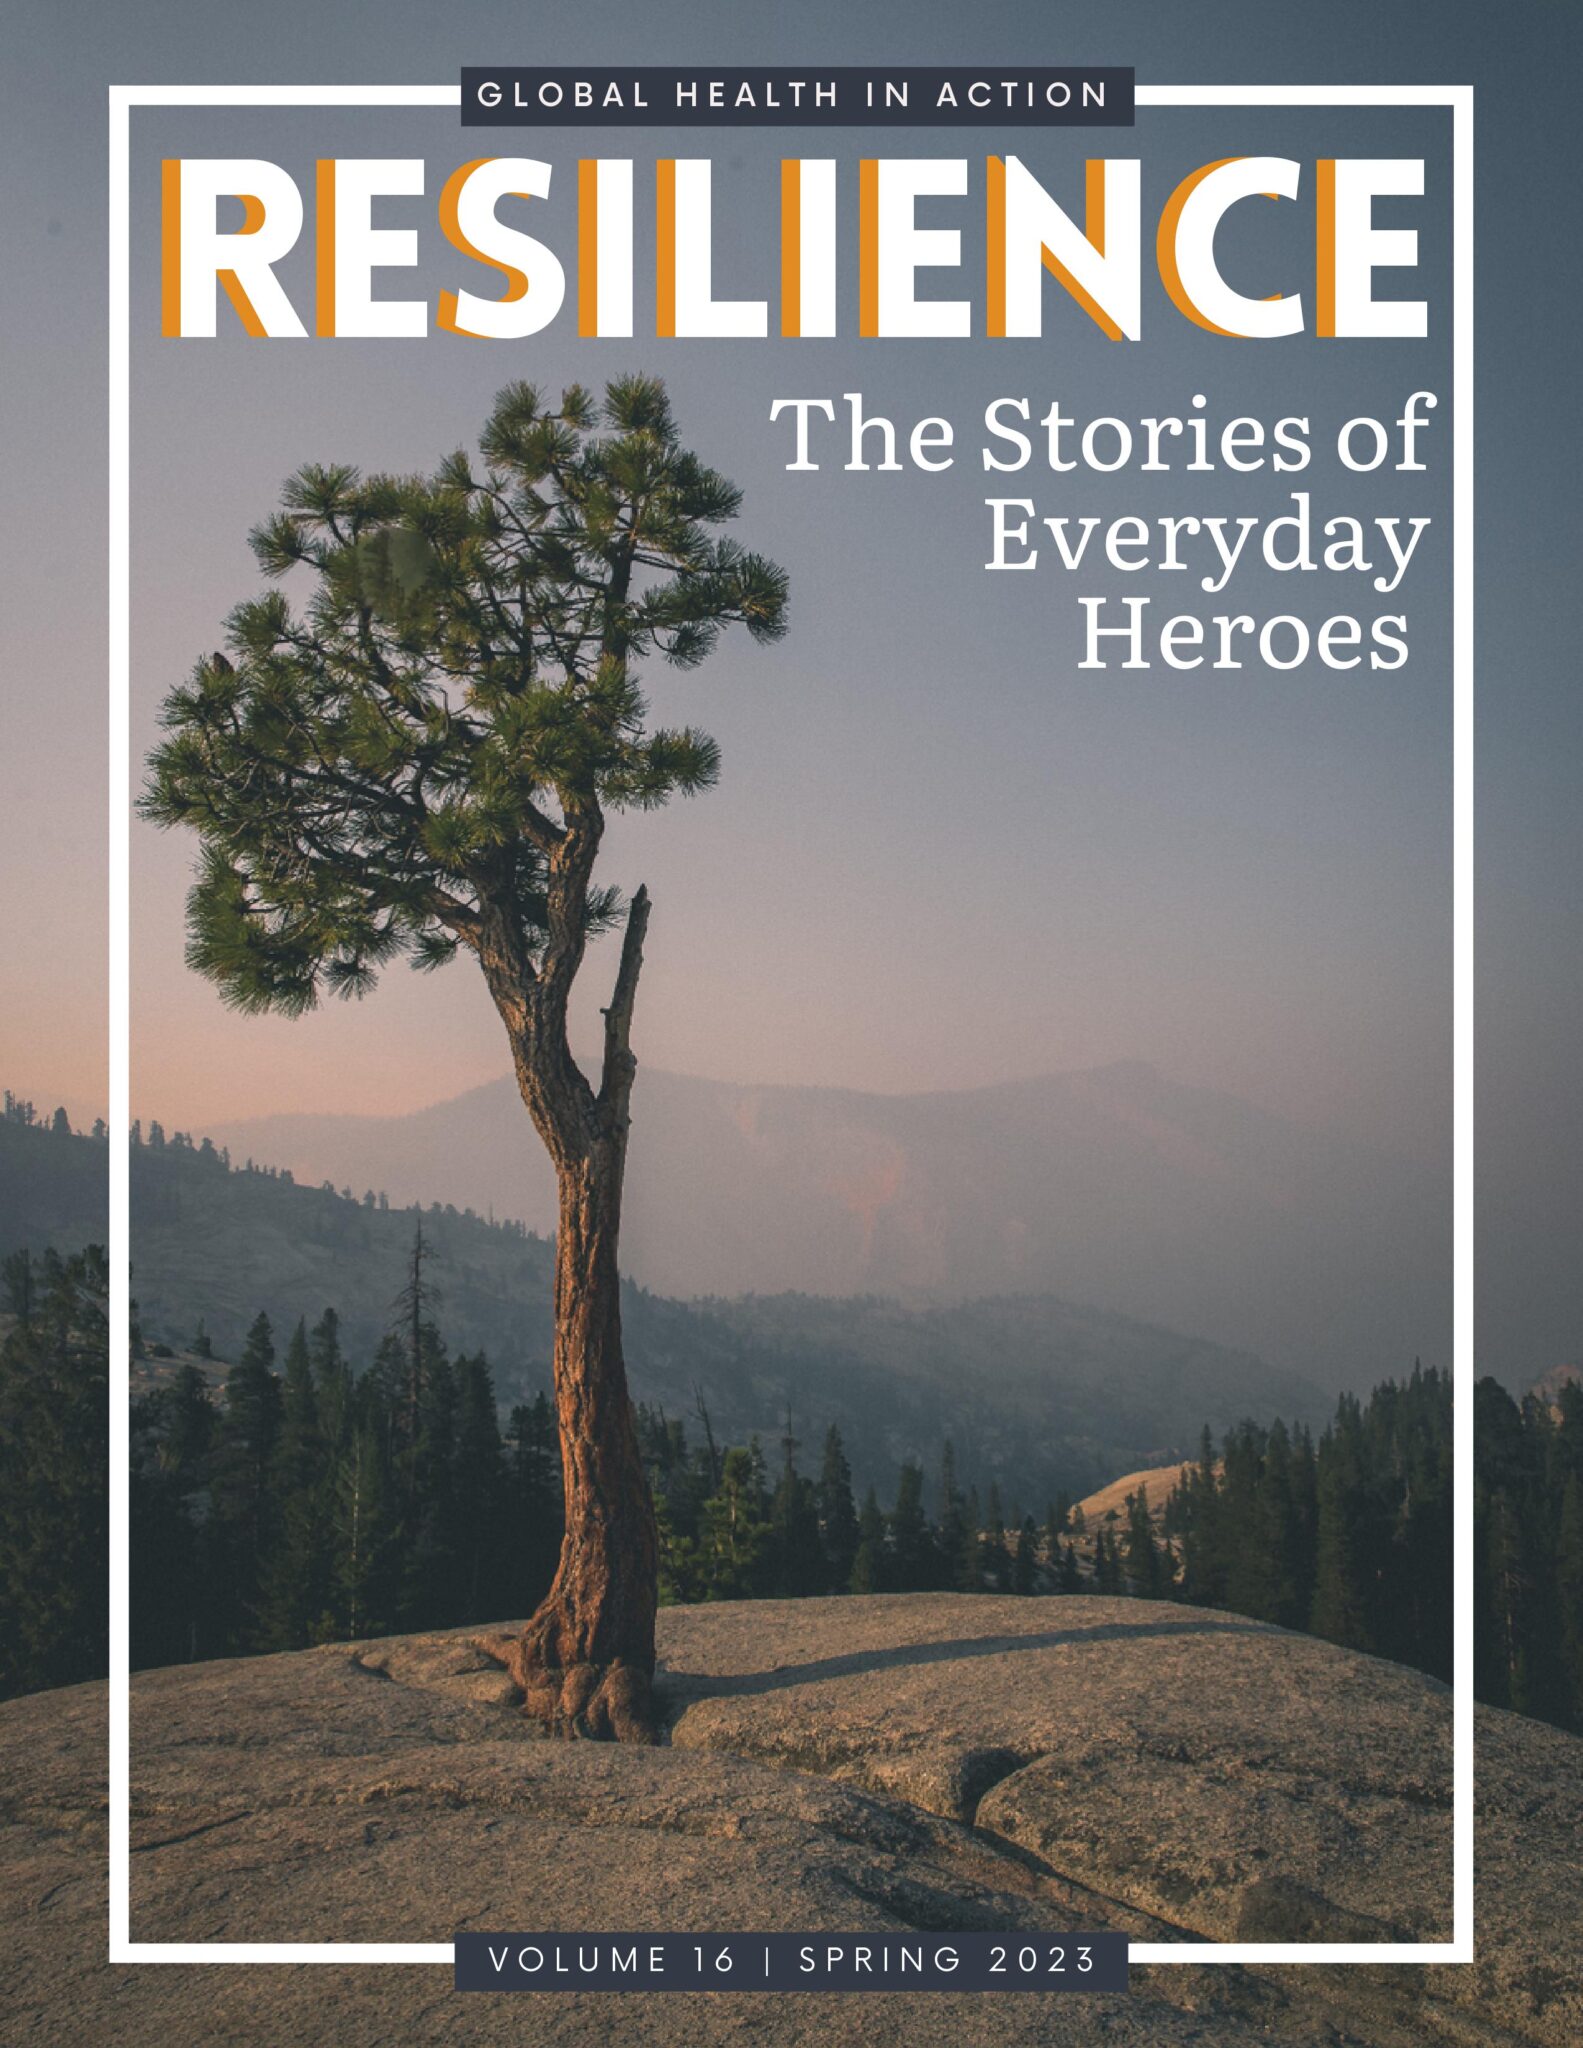 the cover the the resilience edition features a tree alone on a mountain